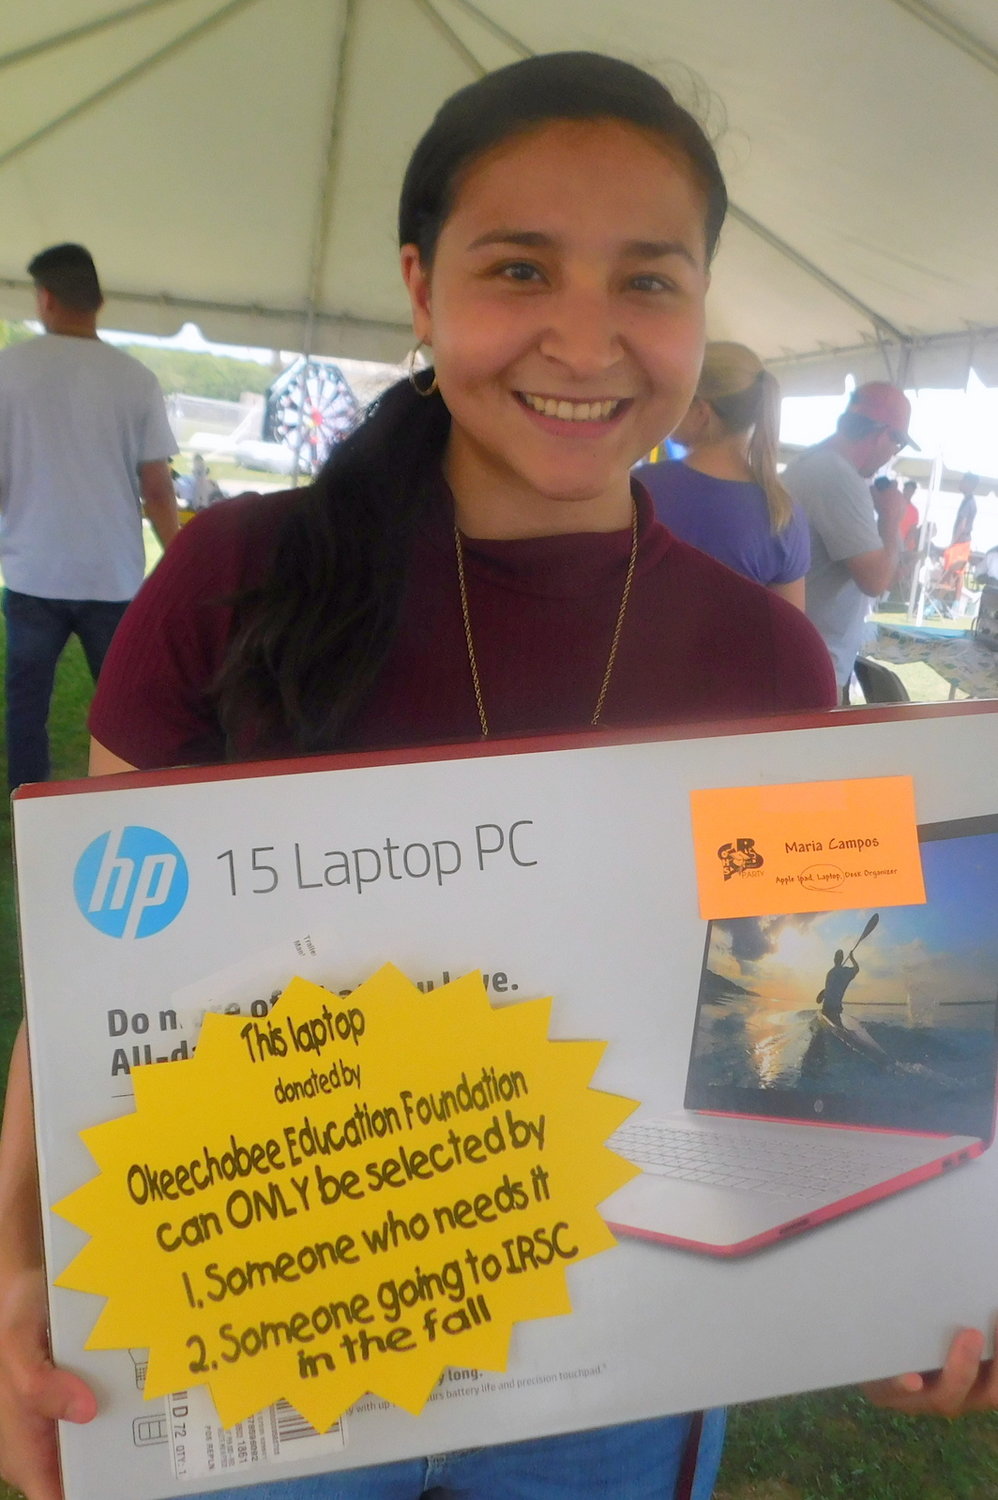 Okeechobee Ed Foundation laptop winner Maria Campos. Maria Campos will be majoring in Business at IRSC.